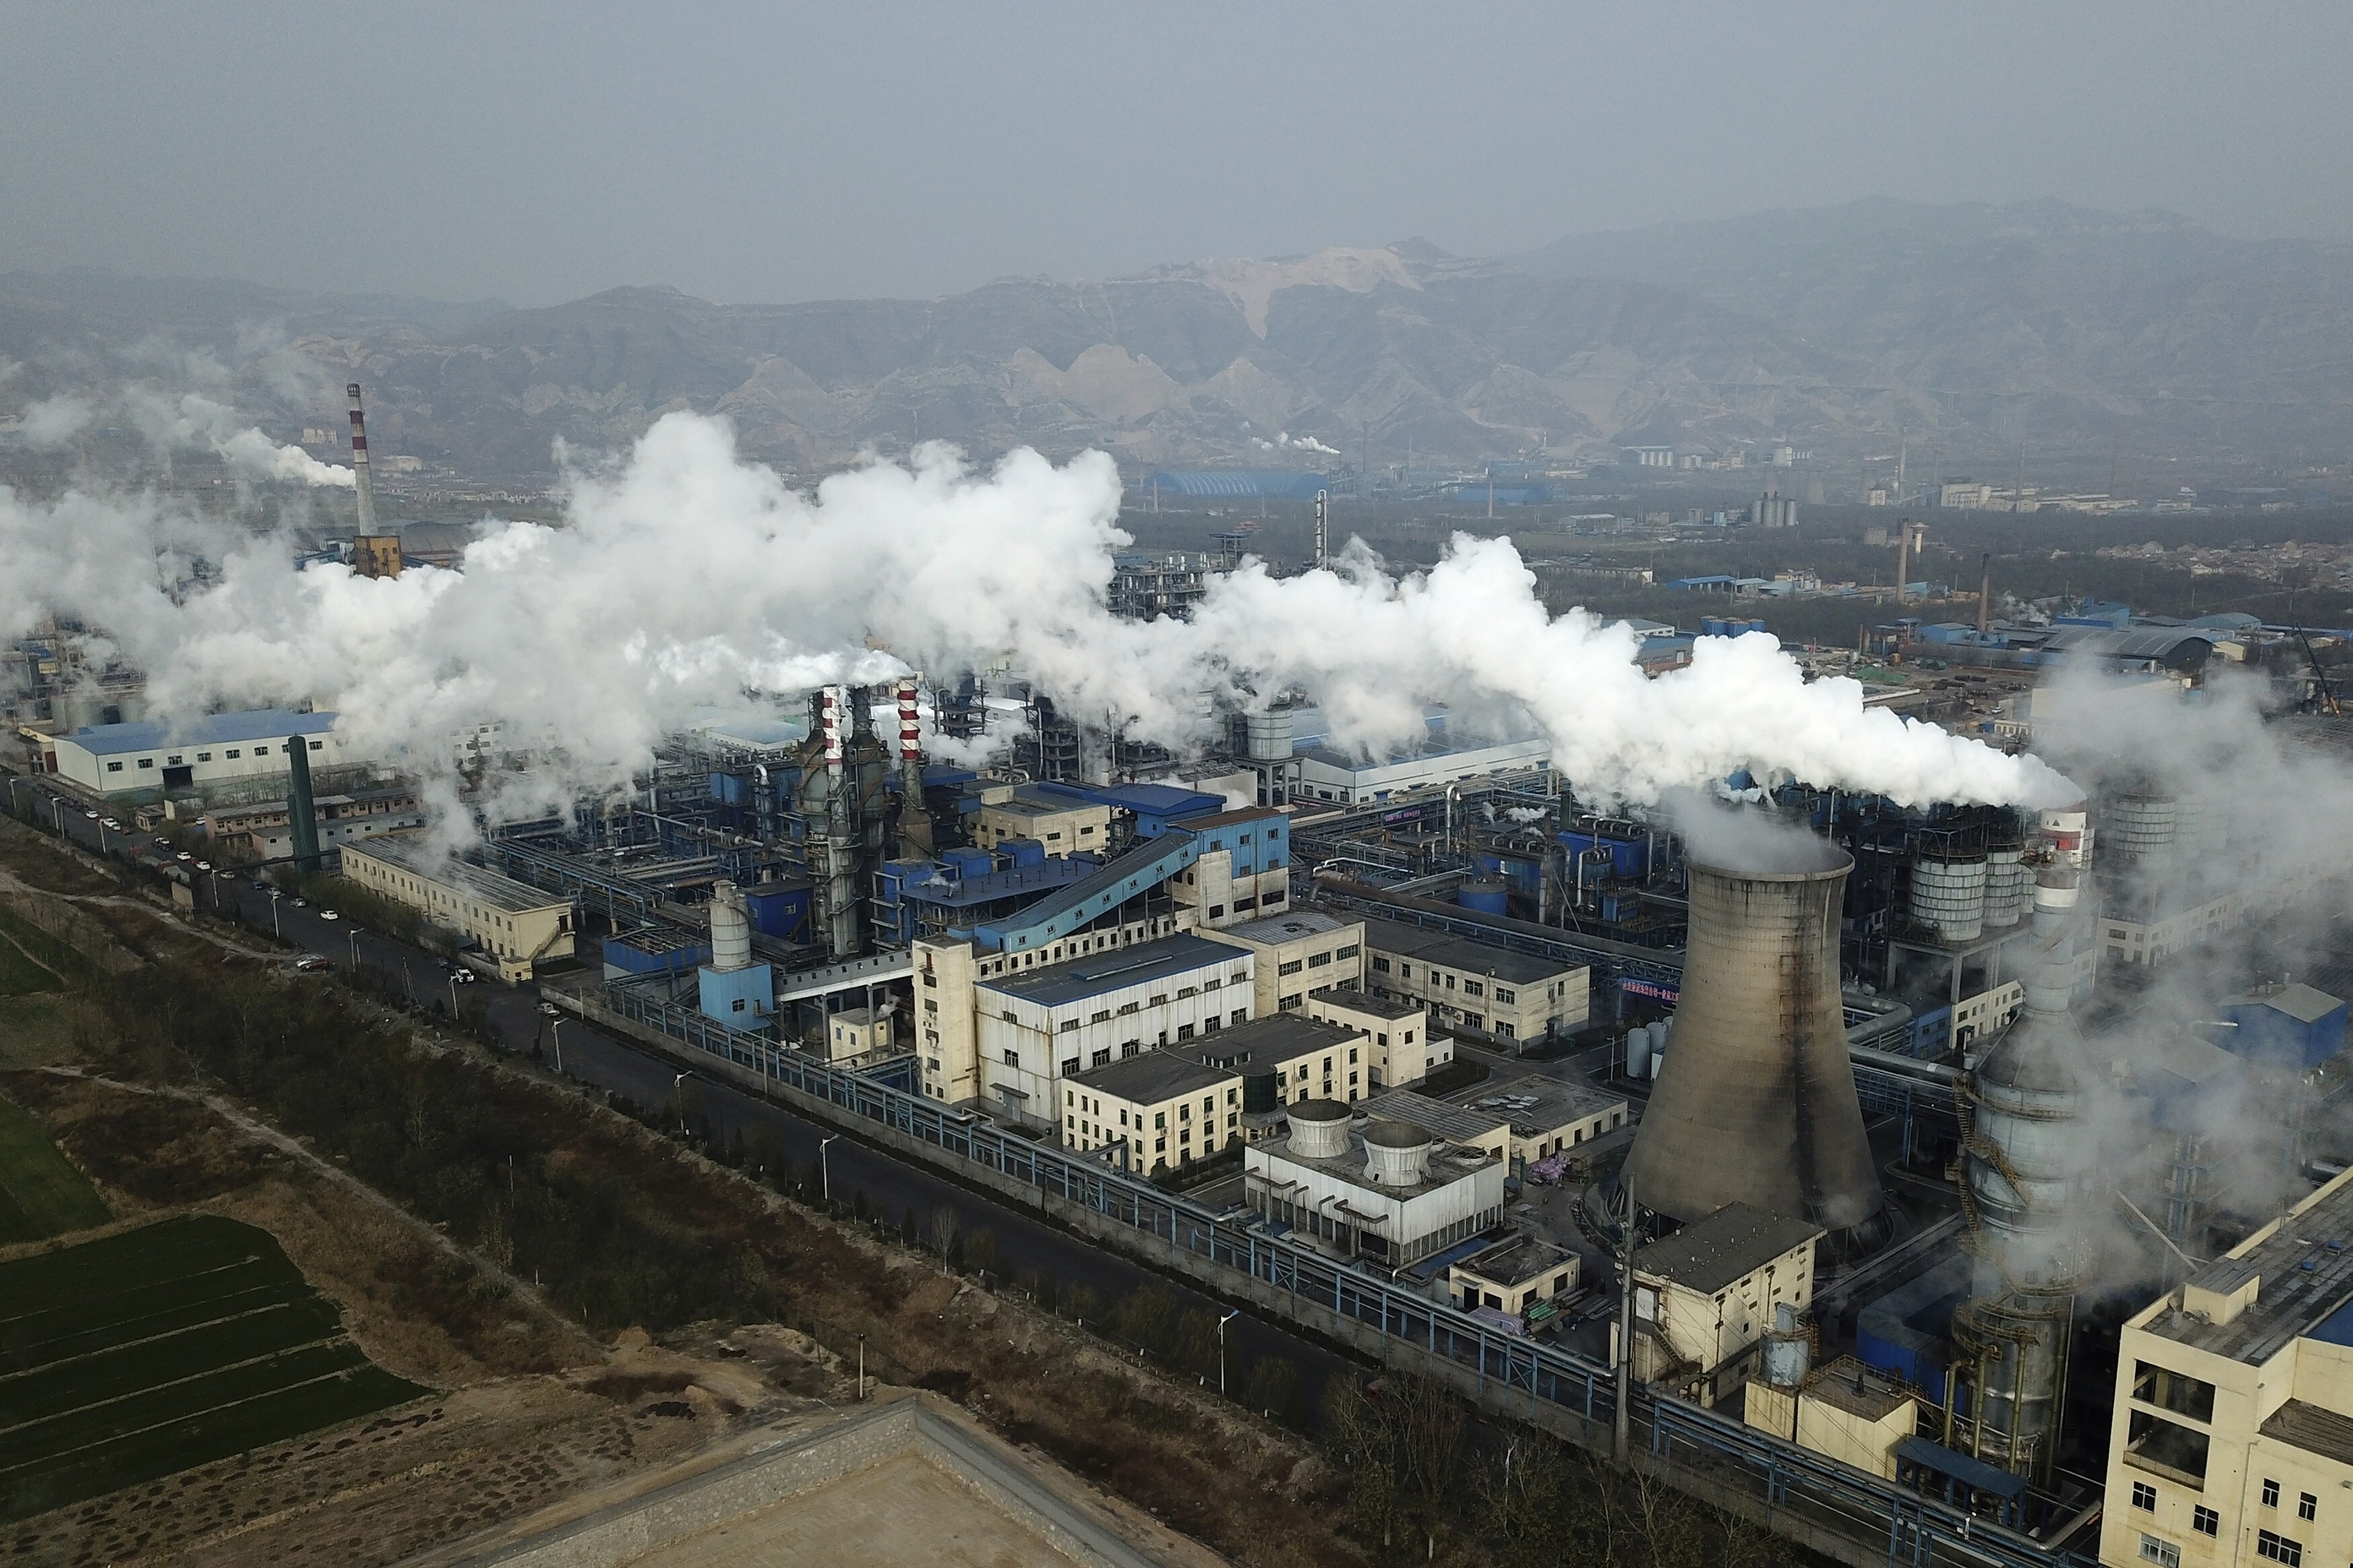 China remains the primary global backer of coal power, and the nation’s overseas coal financing remains extremely demand-driven in the face of environmental concerns. Photo: AP